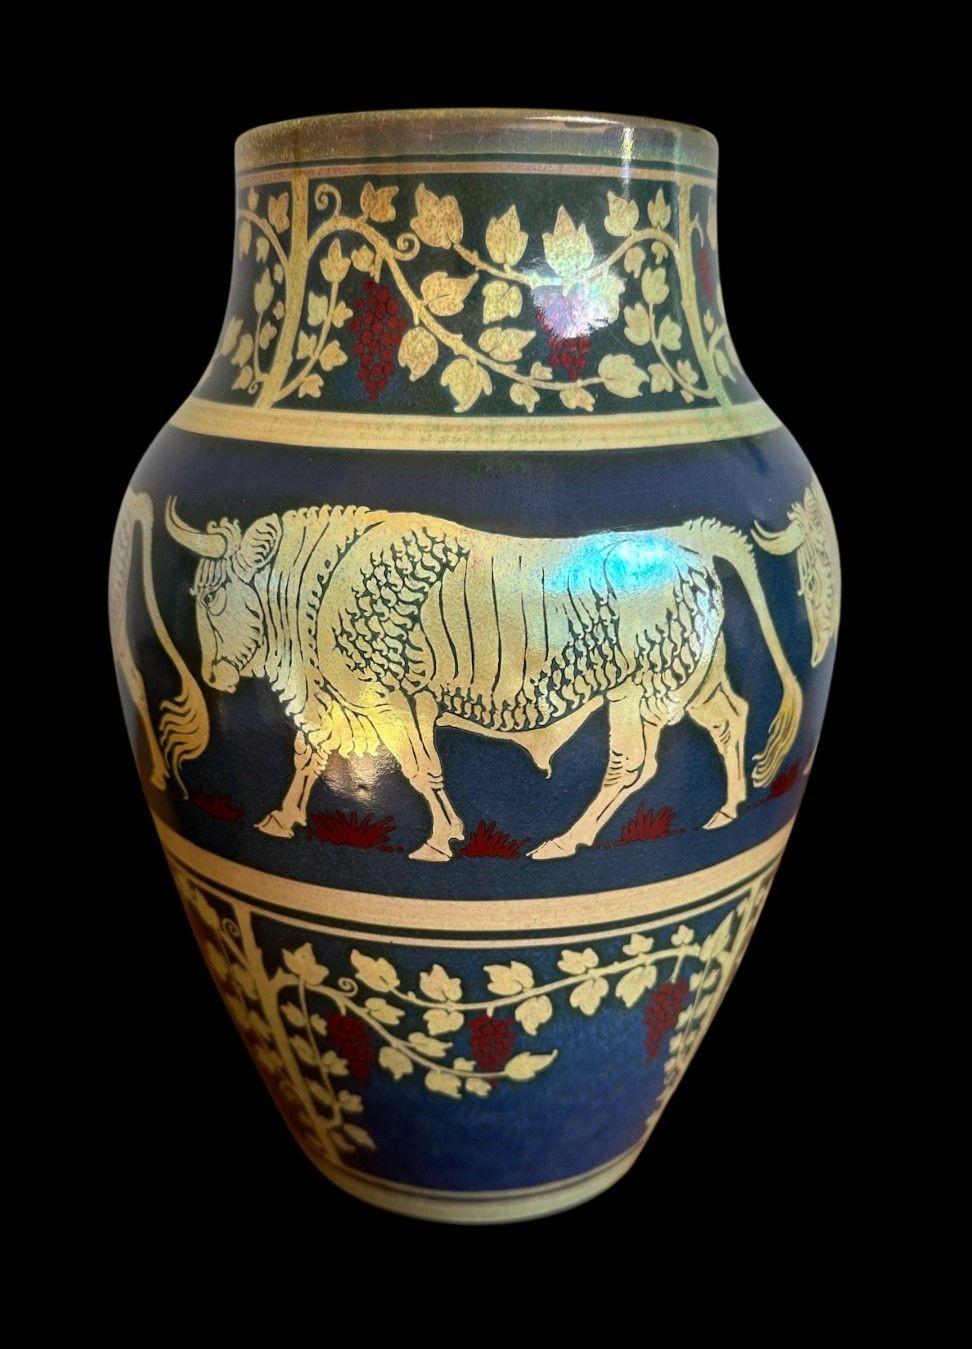 5486
Large Pilkington’s Royal Lancastrian Lustre Vase with a superb firing, decorated with Bulls between a band of grapevines by Richard Joyce.
27cm high, 18cm wide
Glaze frit to the footrim
Date cypher for 1910